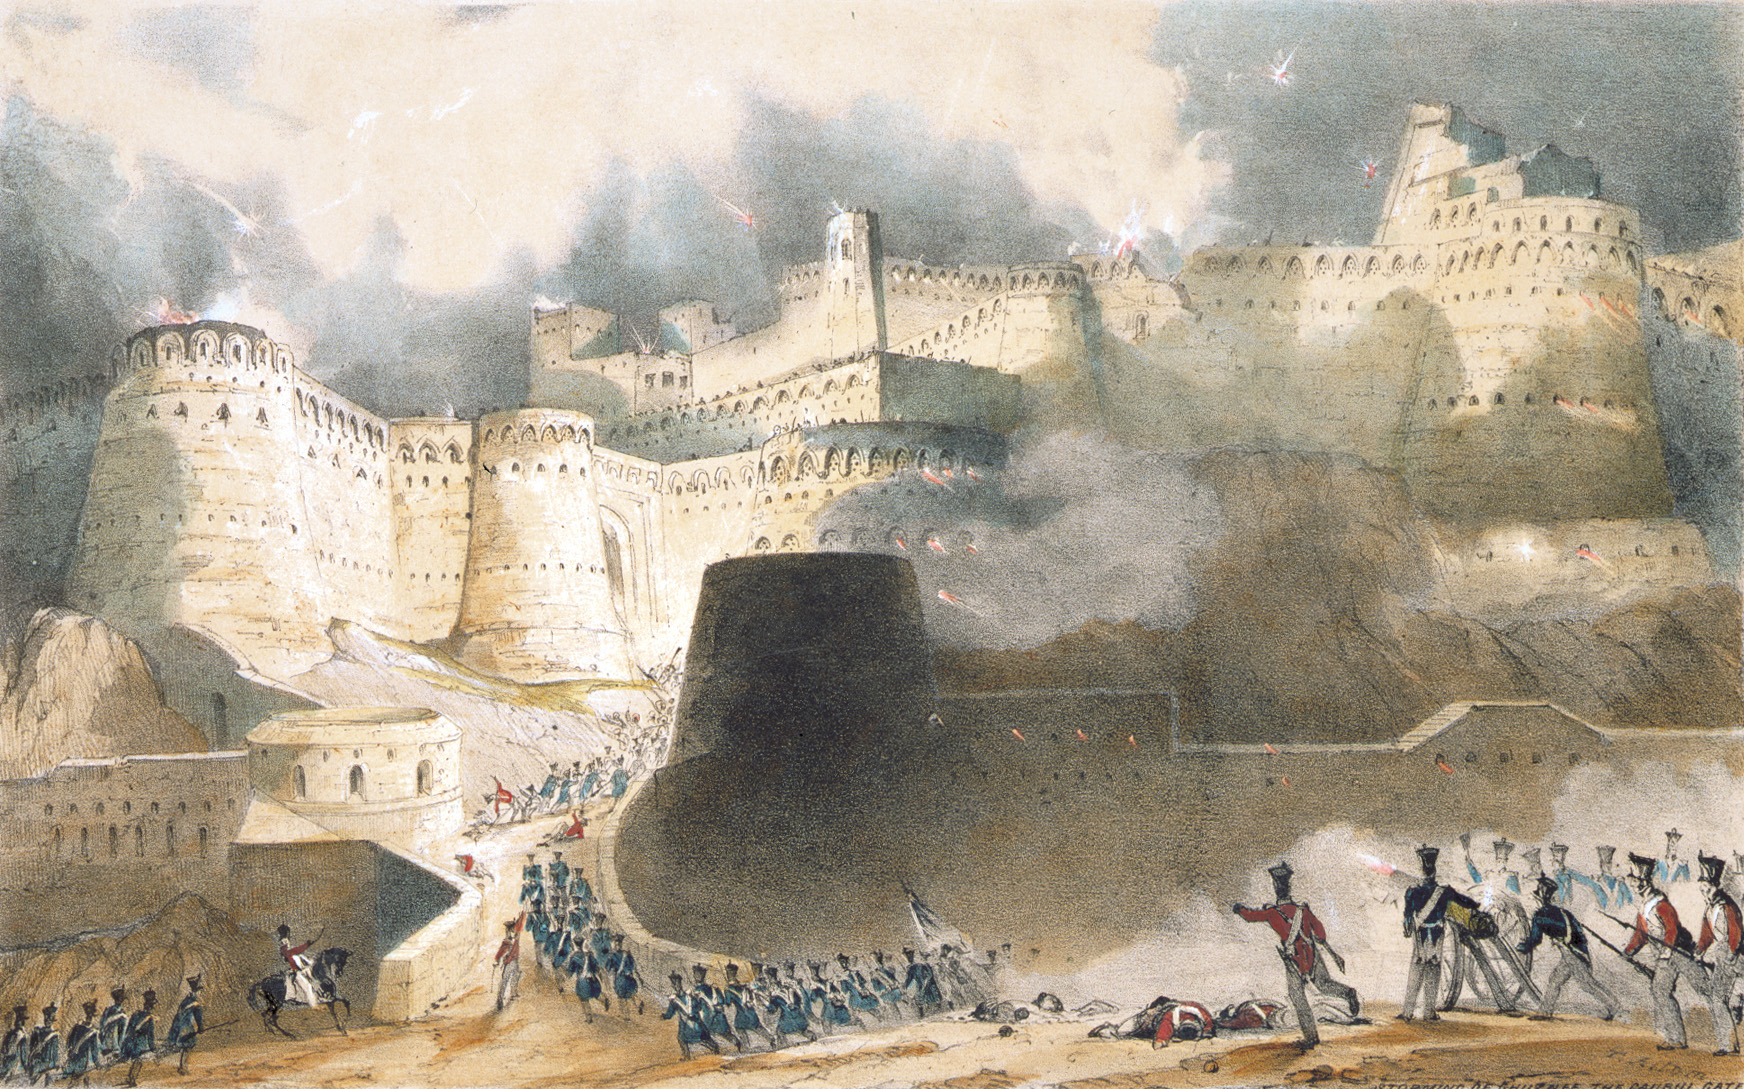 In another depiction, British and Indian troops storm Ghazni, an immense and foreboding fortress built upon a mountaintop. Feints helped the attackers place explosives at a key gate. 